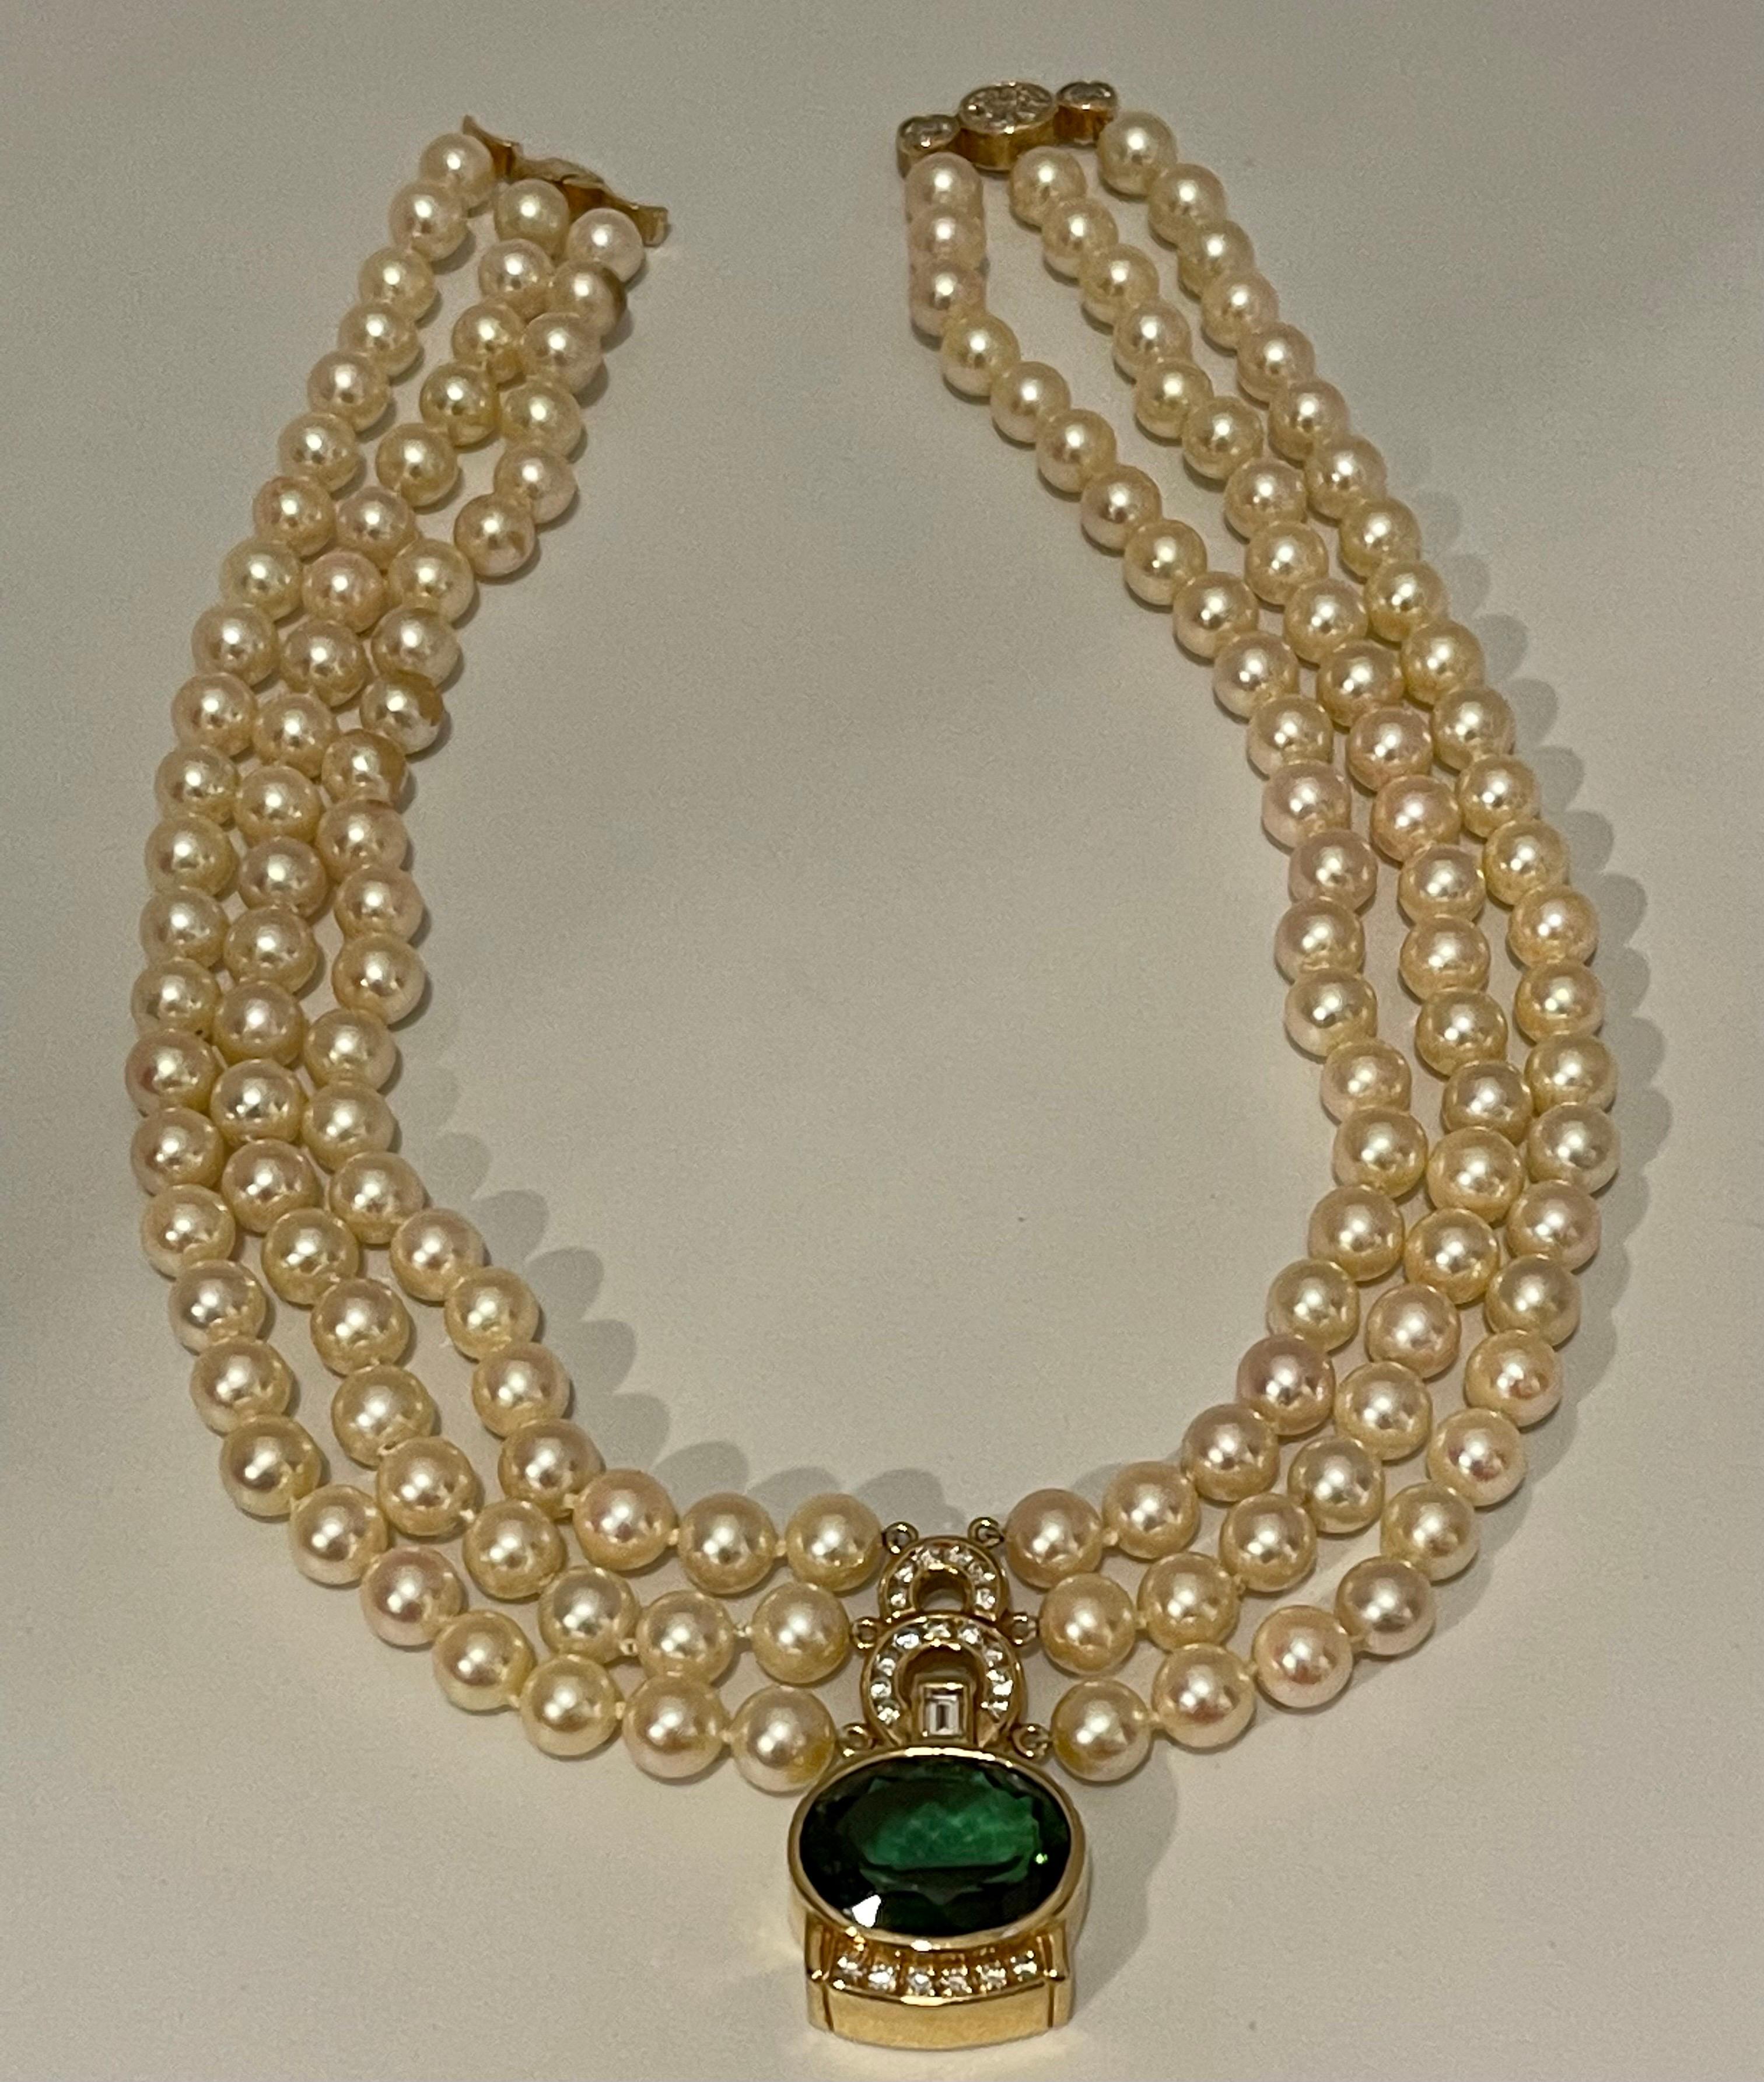 18Ct Green Tourmaline & 2.5Ct Diamond Necklace 14 KY Gold & Triple Pearl Layers For Sale 3